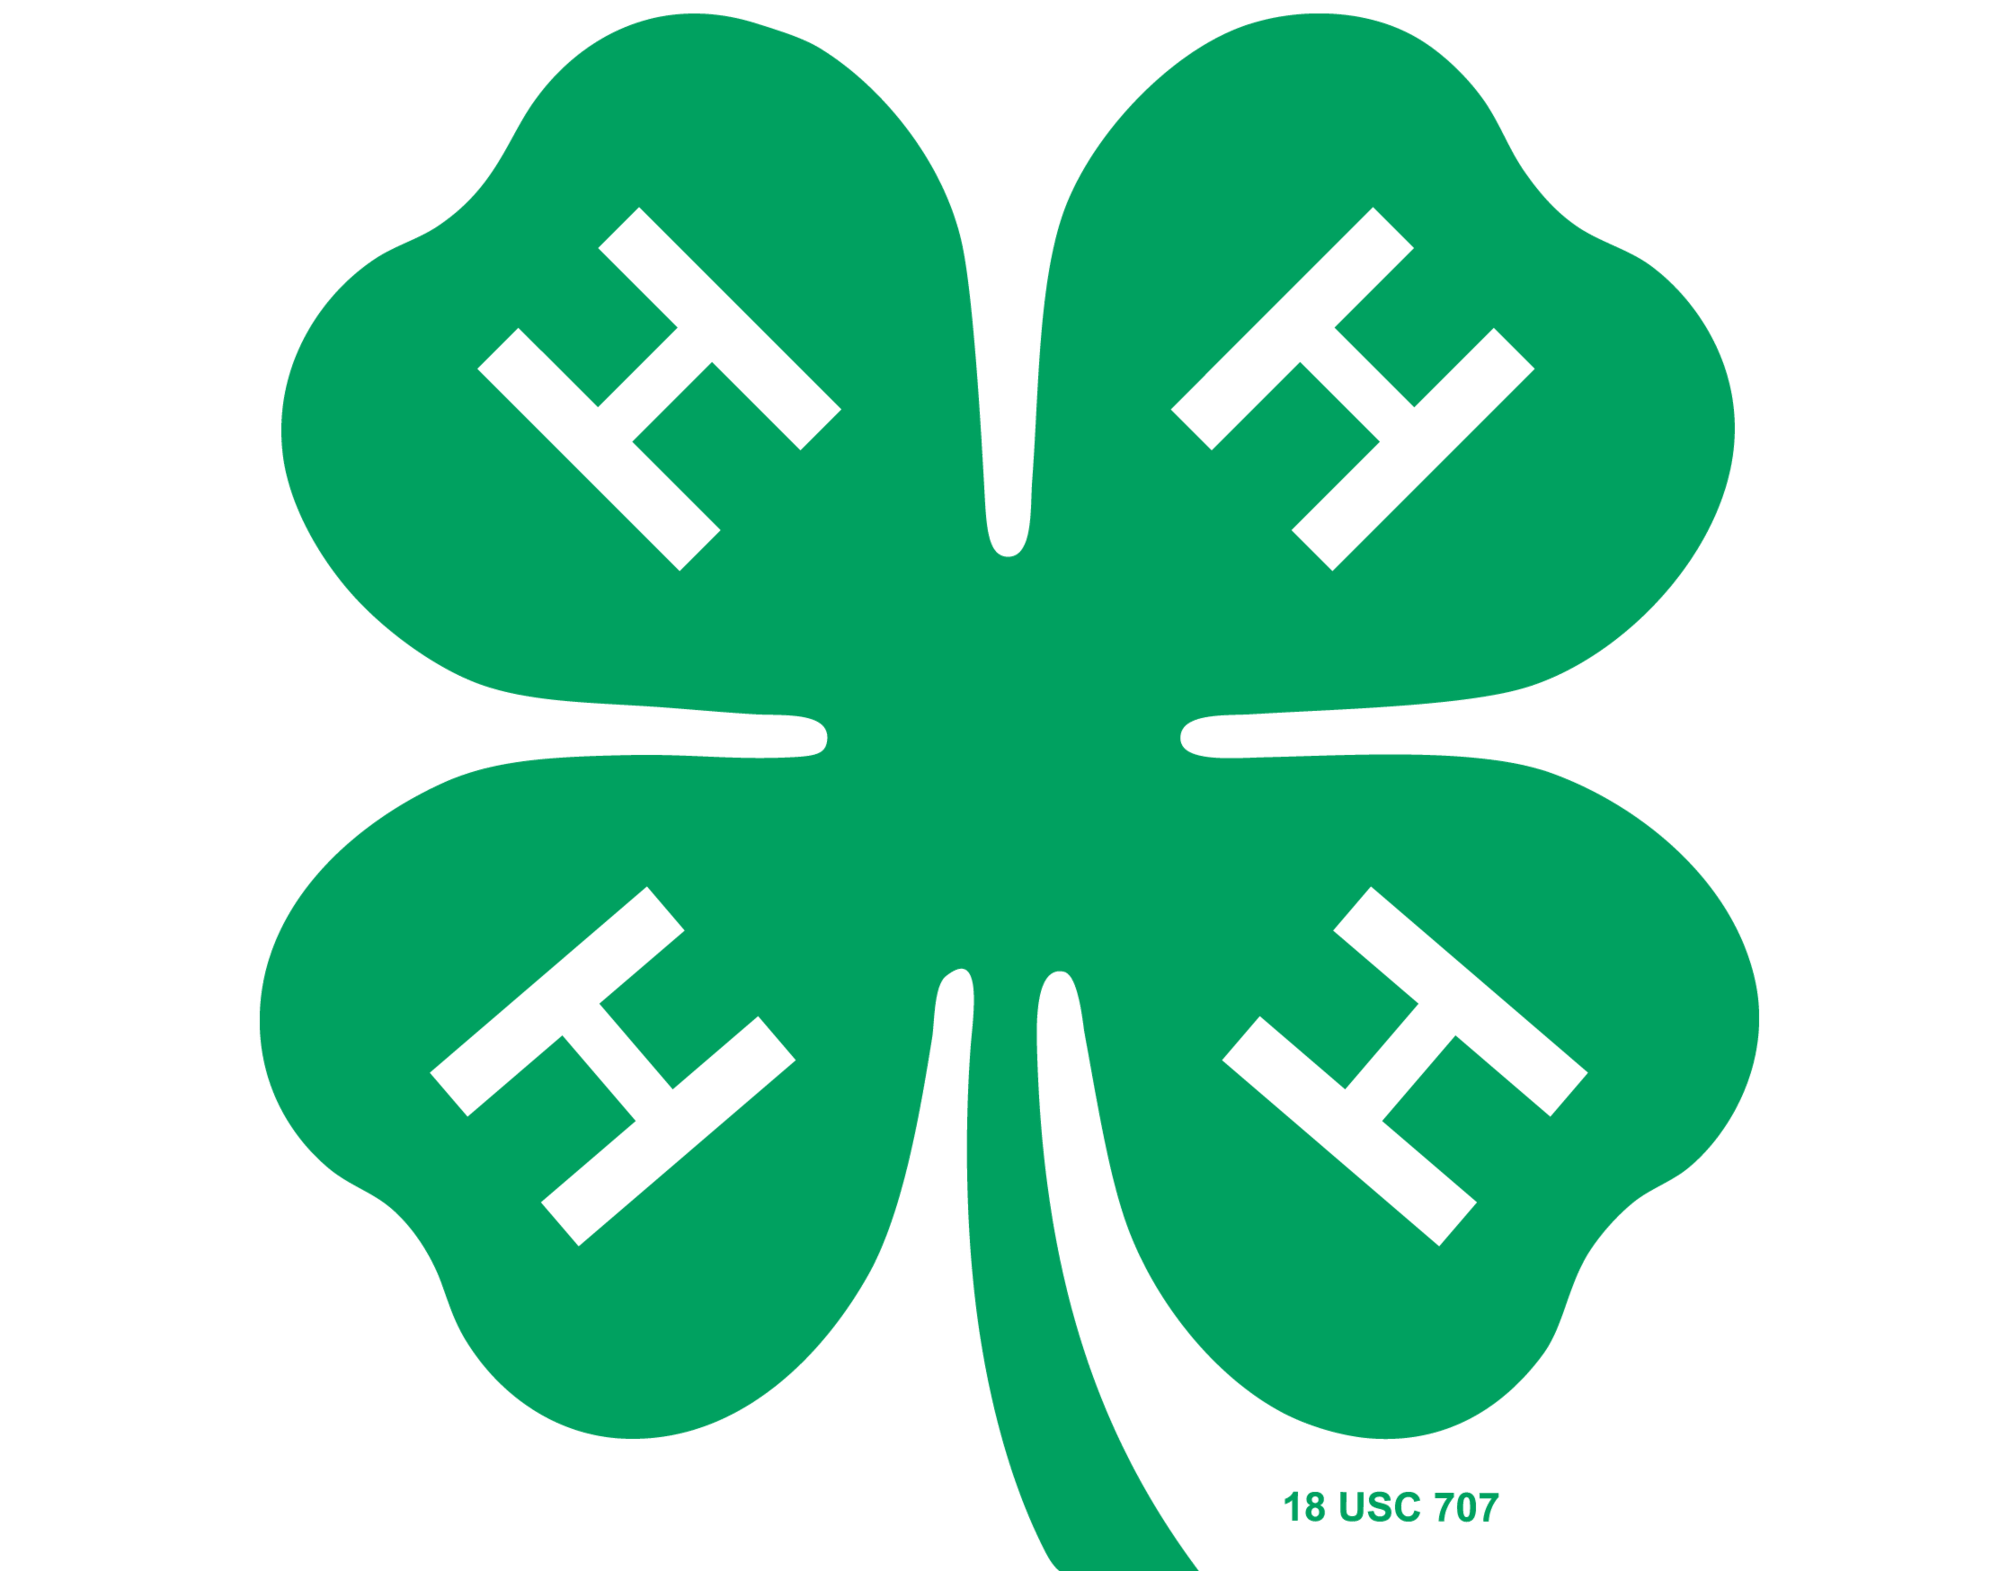 4-H logo: green four-leaf clover with a white H on each of the leaves